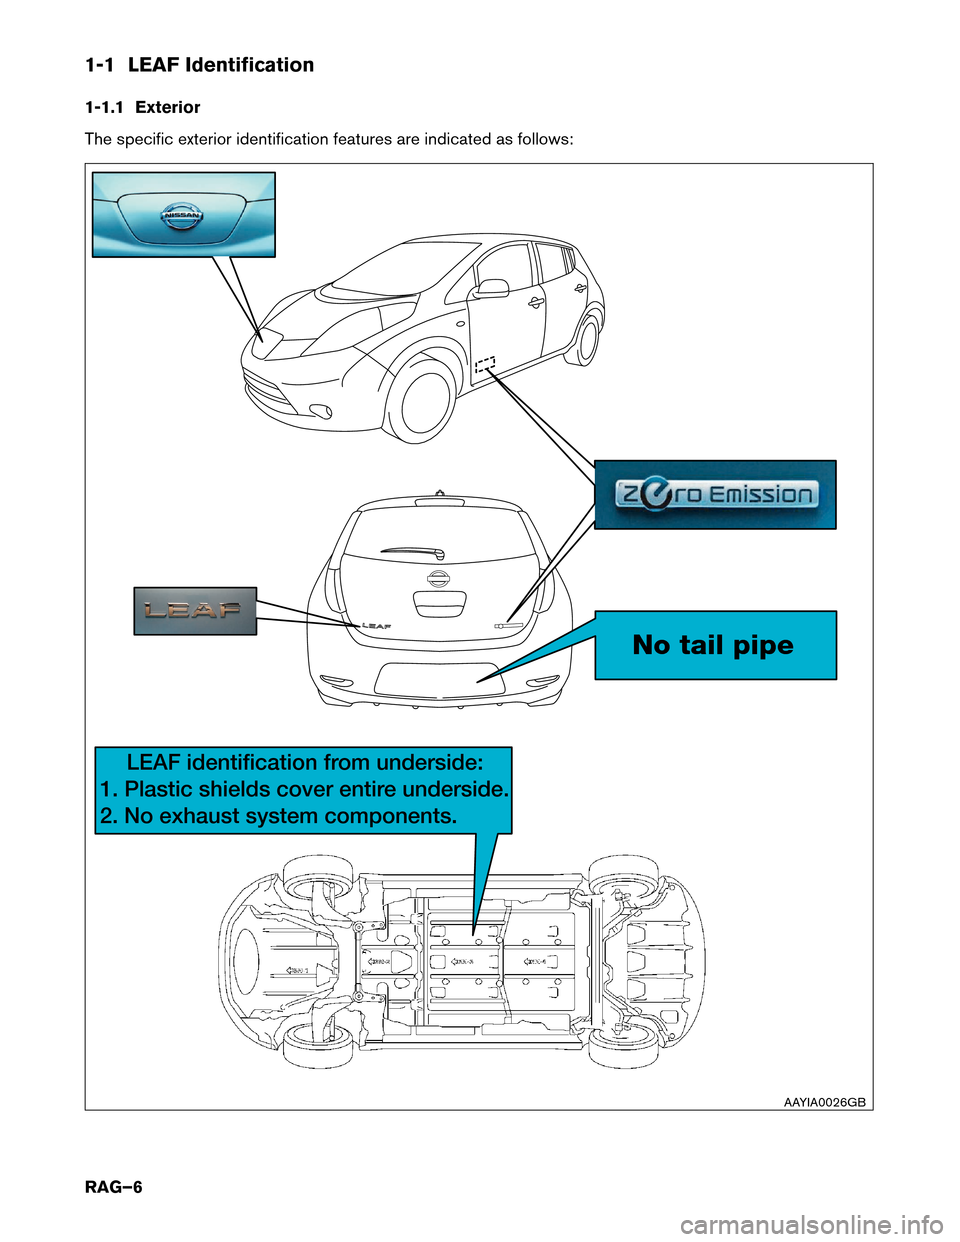 NISSAN LEAF 2016 1.G Roadside Assistance Guide 1-1 LEAF Identification
1-1.1
Exterior
The specific exterior identification features are indicated as follows: No tail pipe
LEAF identification from underside:
1. Plastic shields cover entir
 e under